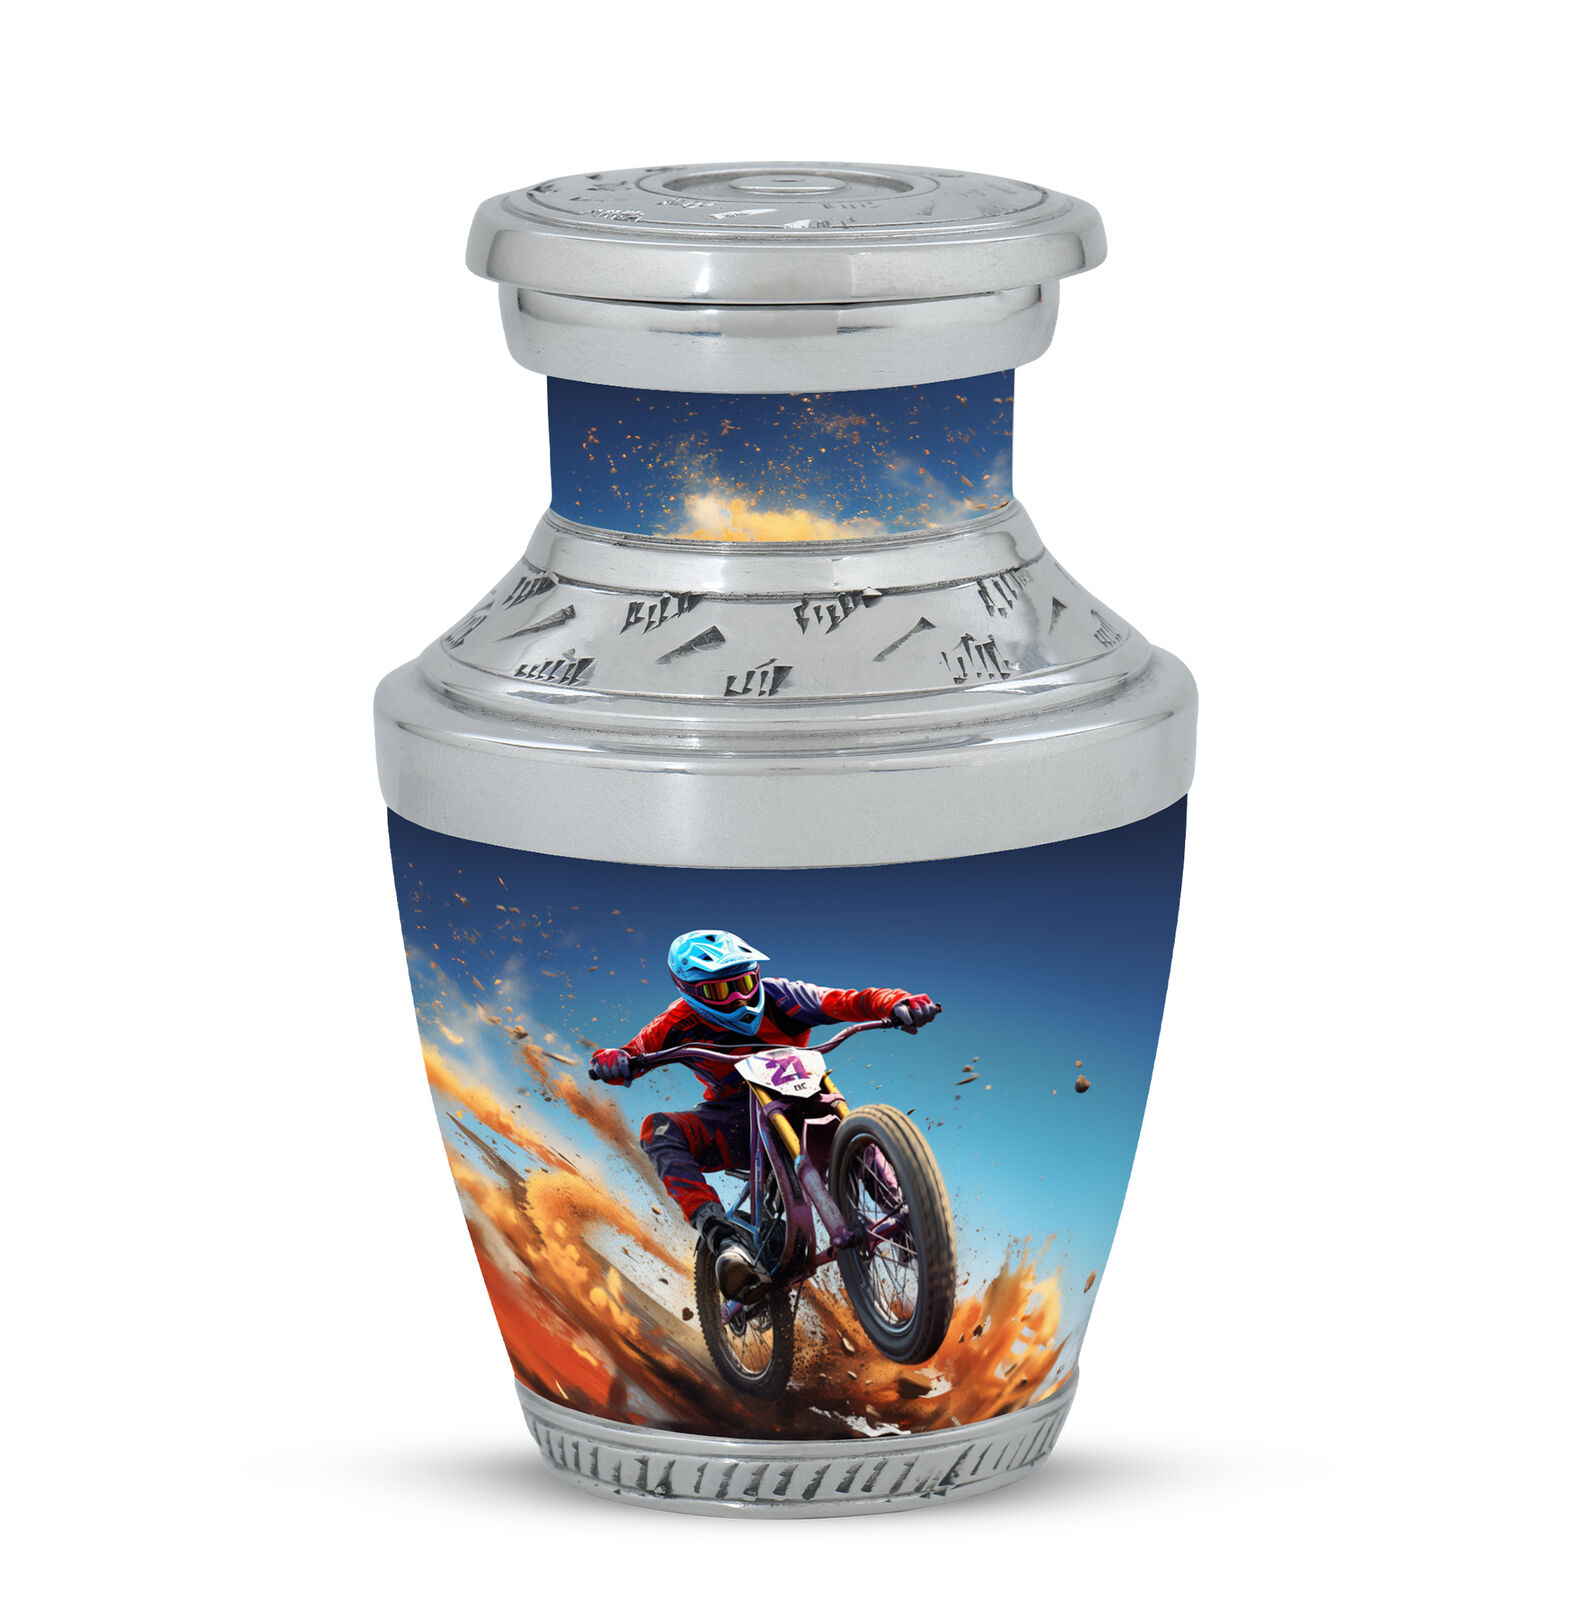 Decorative Urns For Ashes Dirt Track Cyclone (3 Inch) Pack Of 1